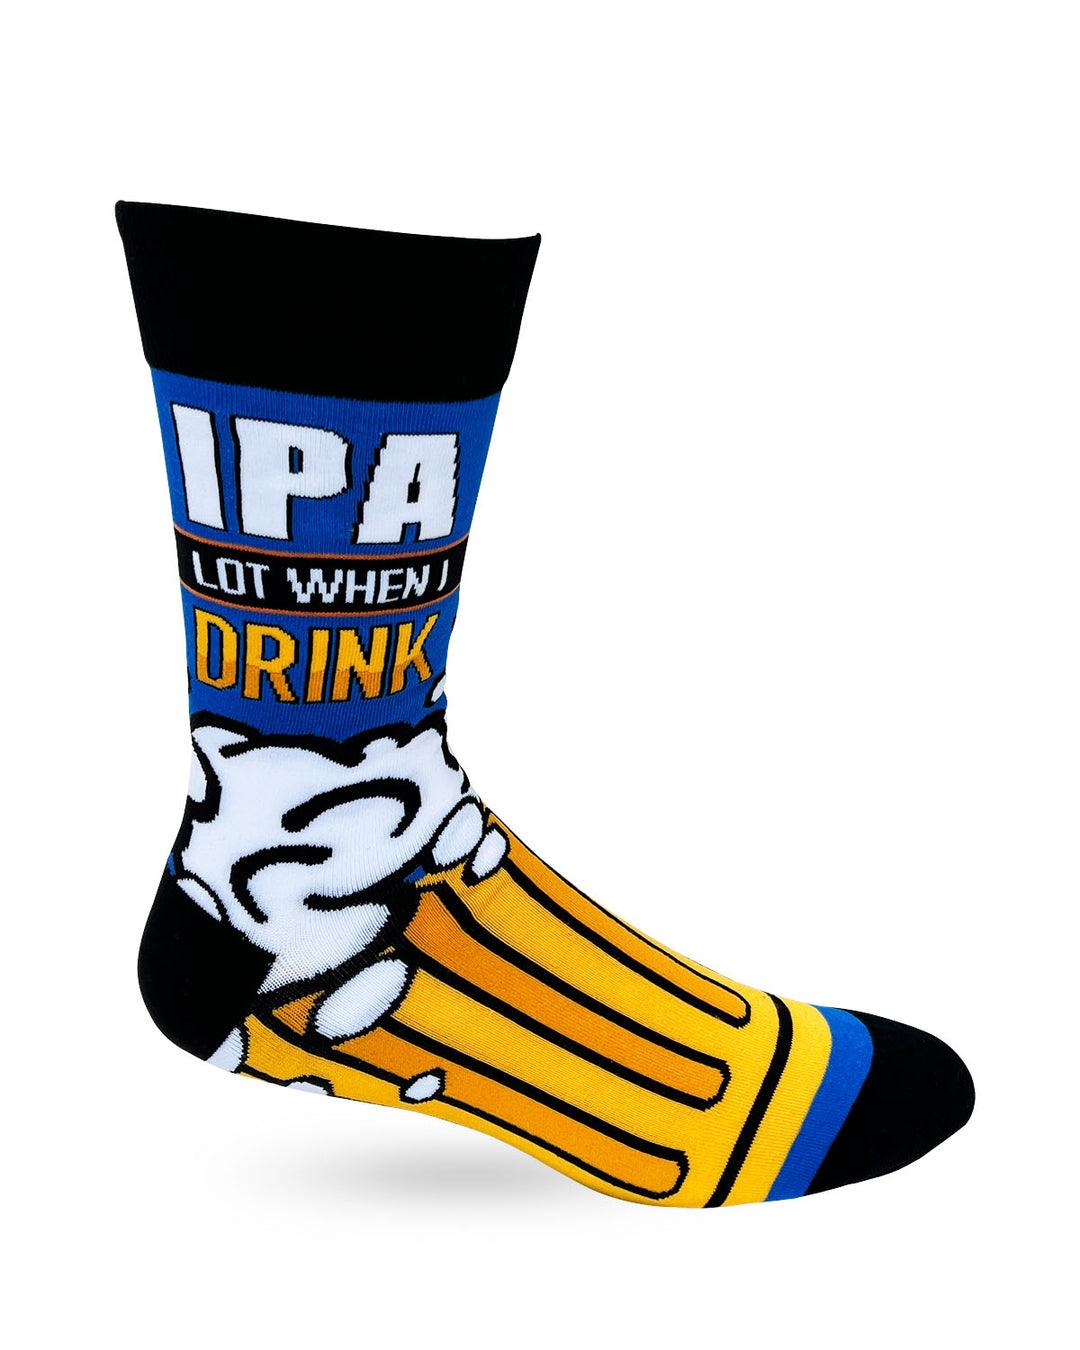 Funny beer sock with saying "IPA Lot When I Drink" for Men.